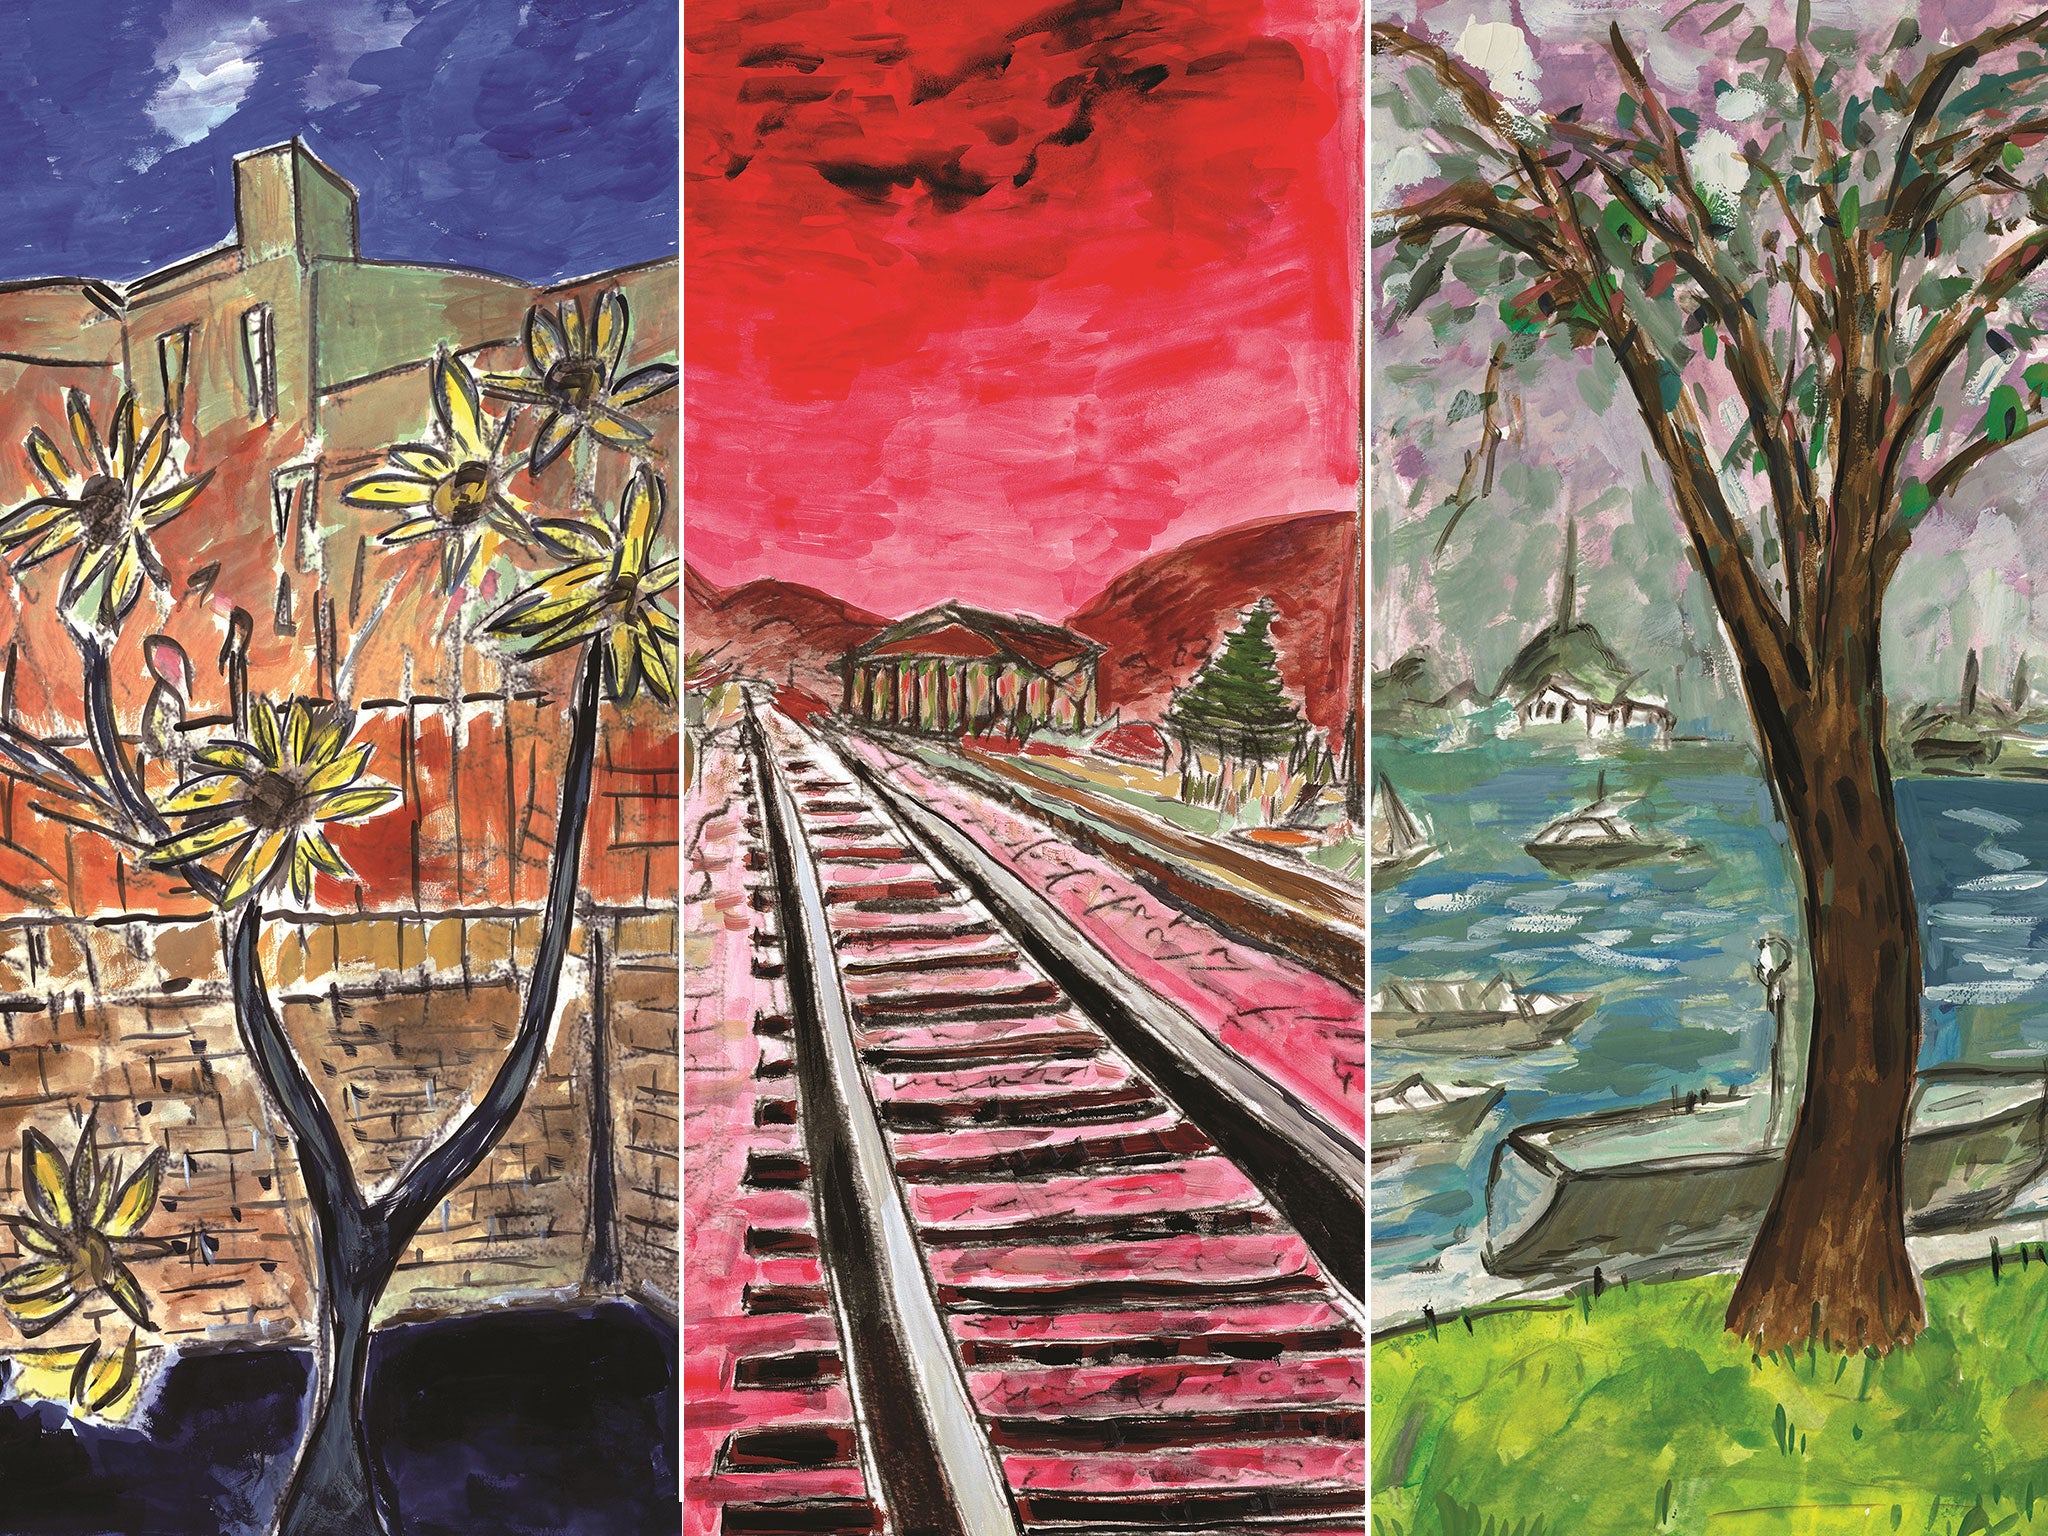 Glimpses of three paintings in Bob Dylan's Drawn Blank Series collection